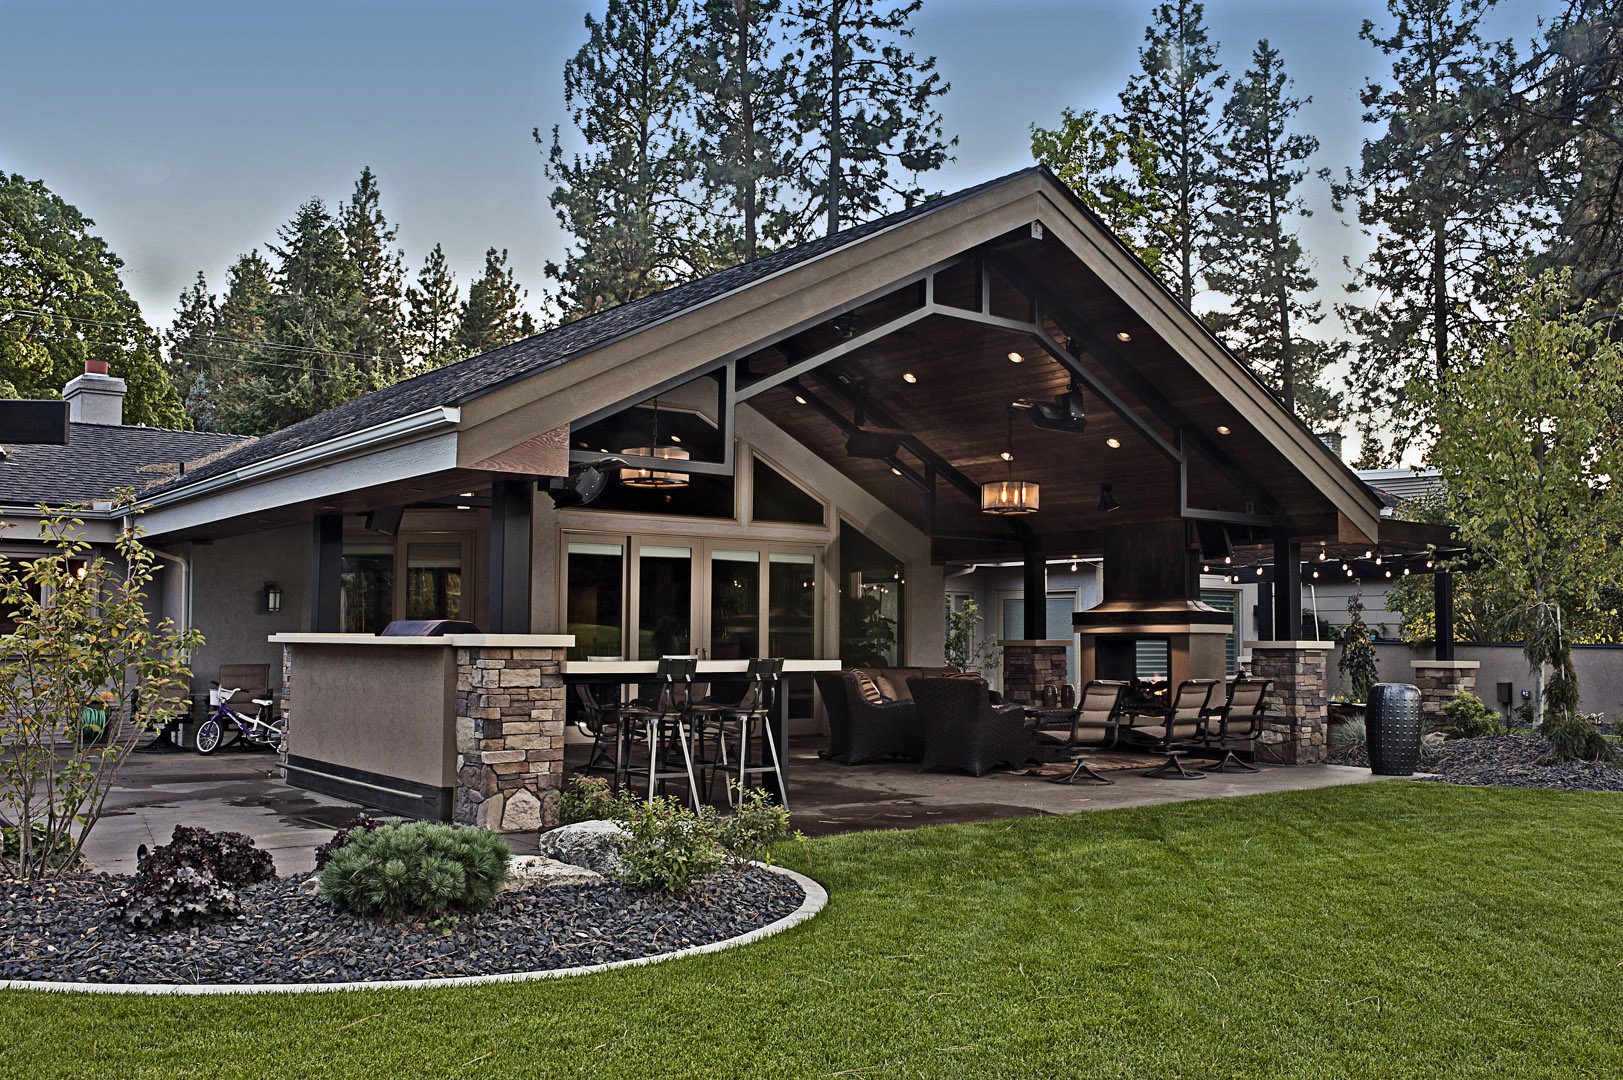 Manito Outdoor Living » Land Expressions